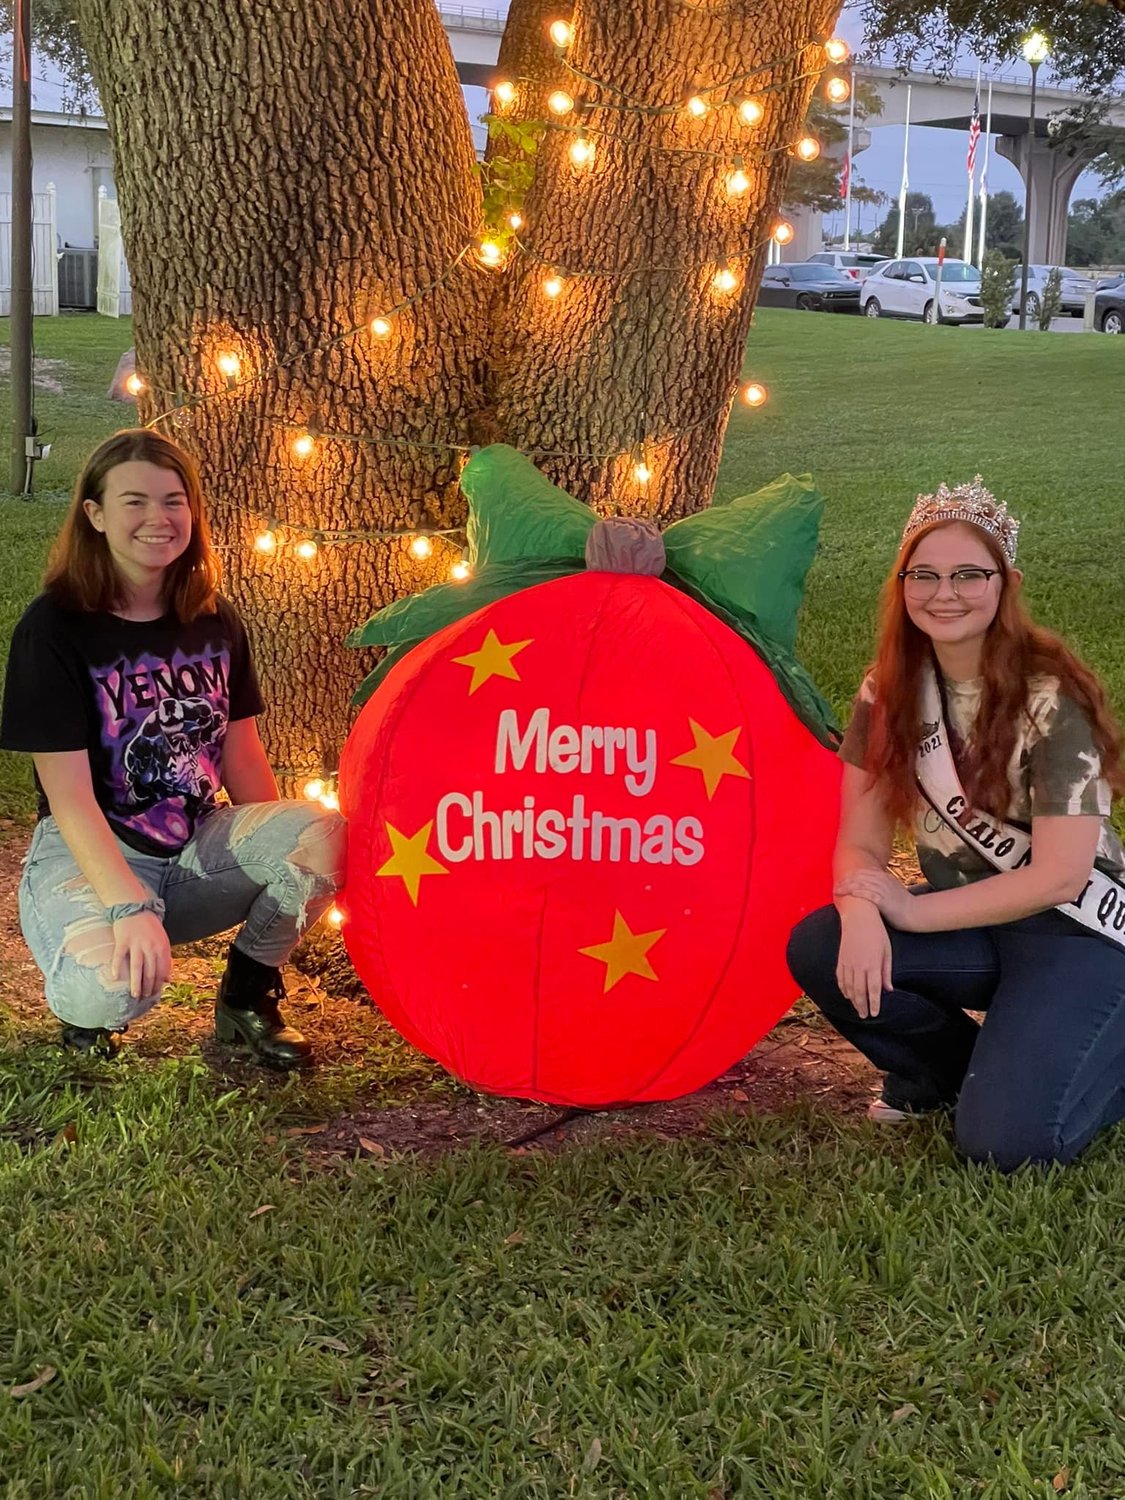 MOORE HAVEN -- Glades County residents enjoyed Christmas on the Caloosahatchee on Dec. 10.